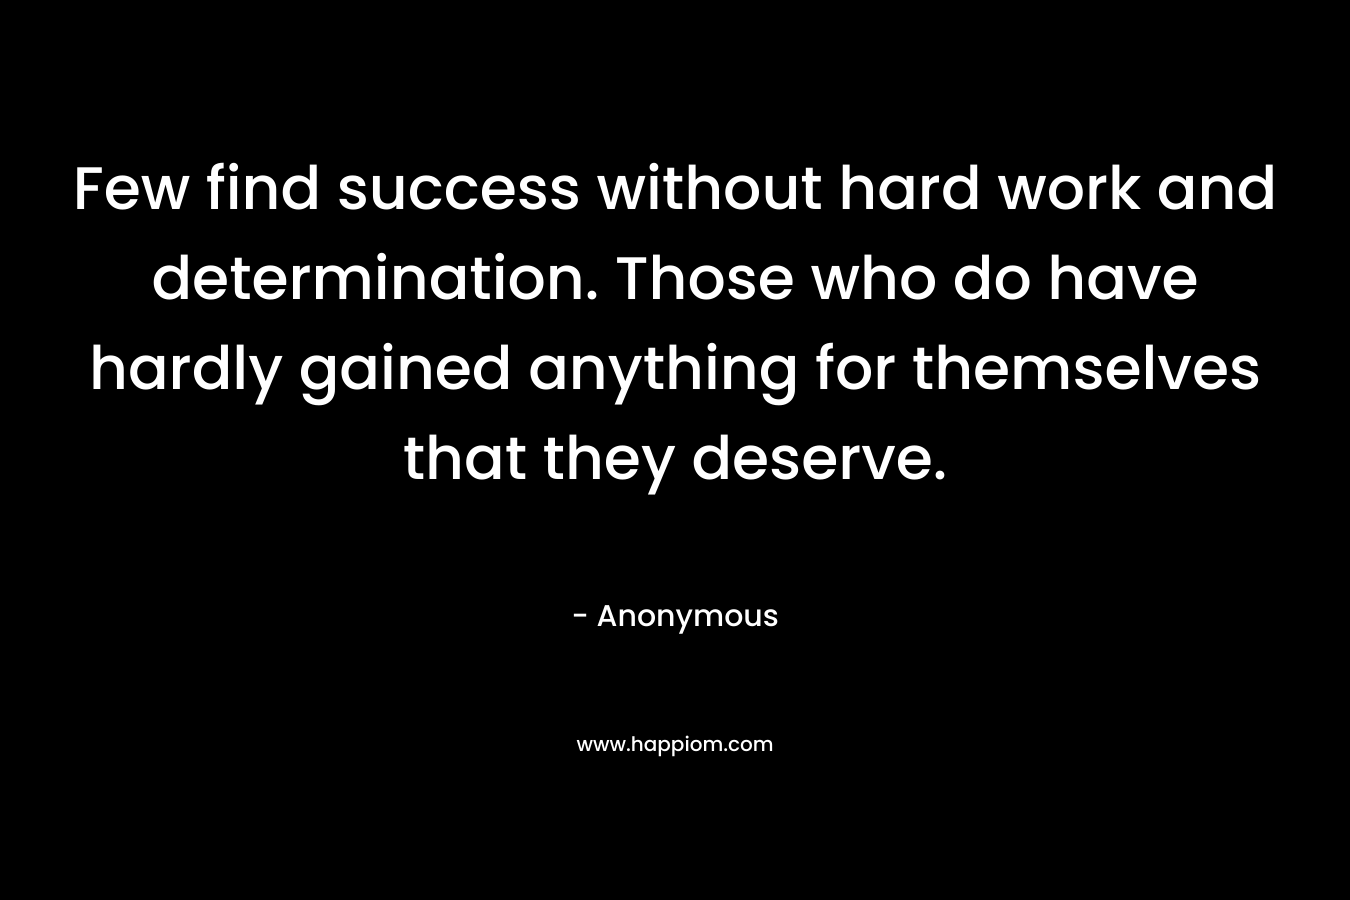 Few find success without hard work and determination. Those who do have hardly gained anything for themselves that they deserve. – Anonymous